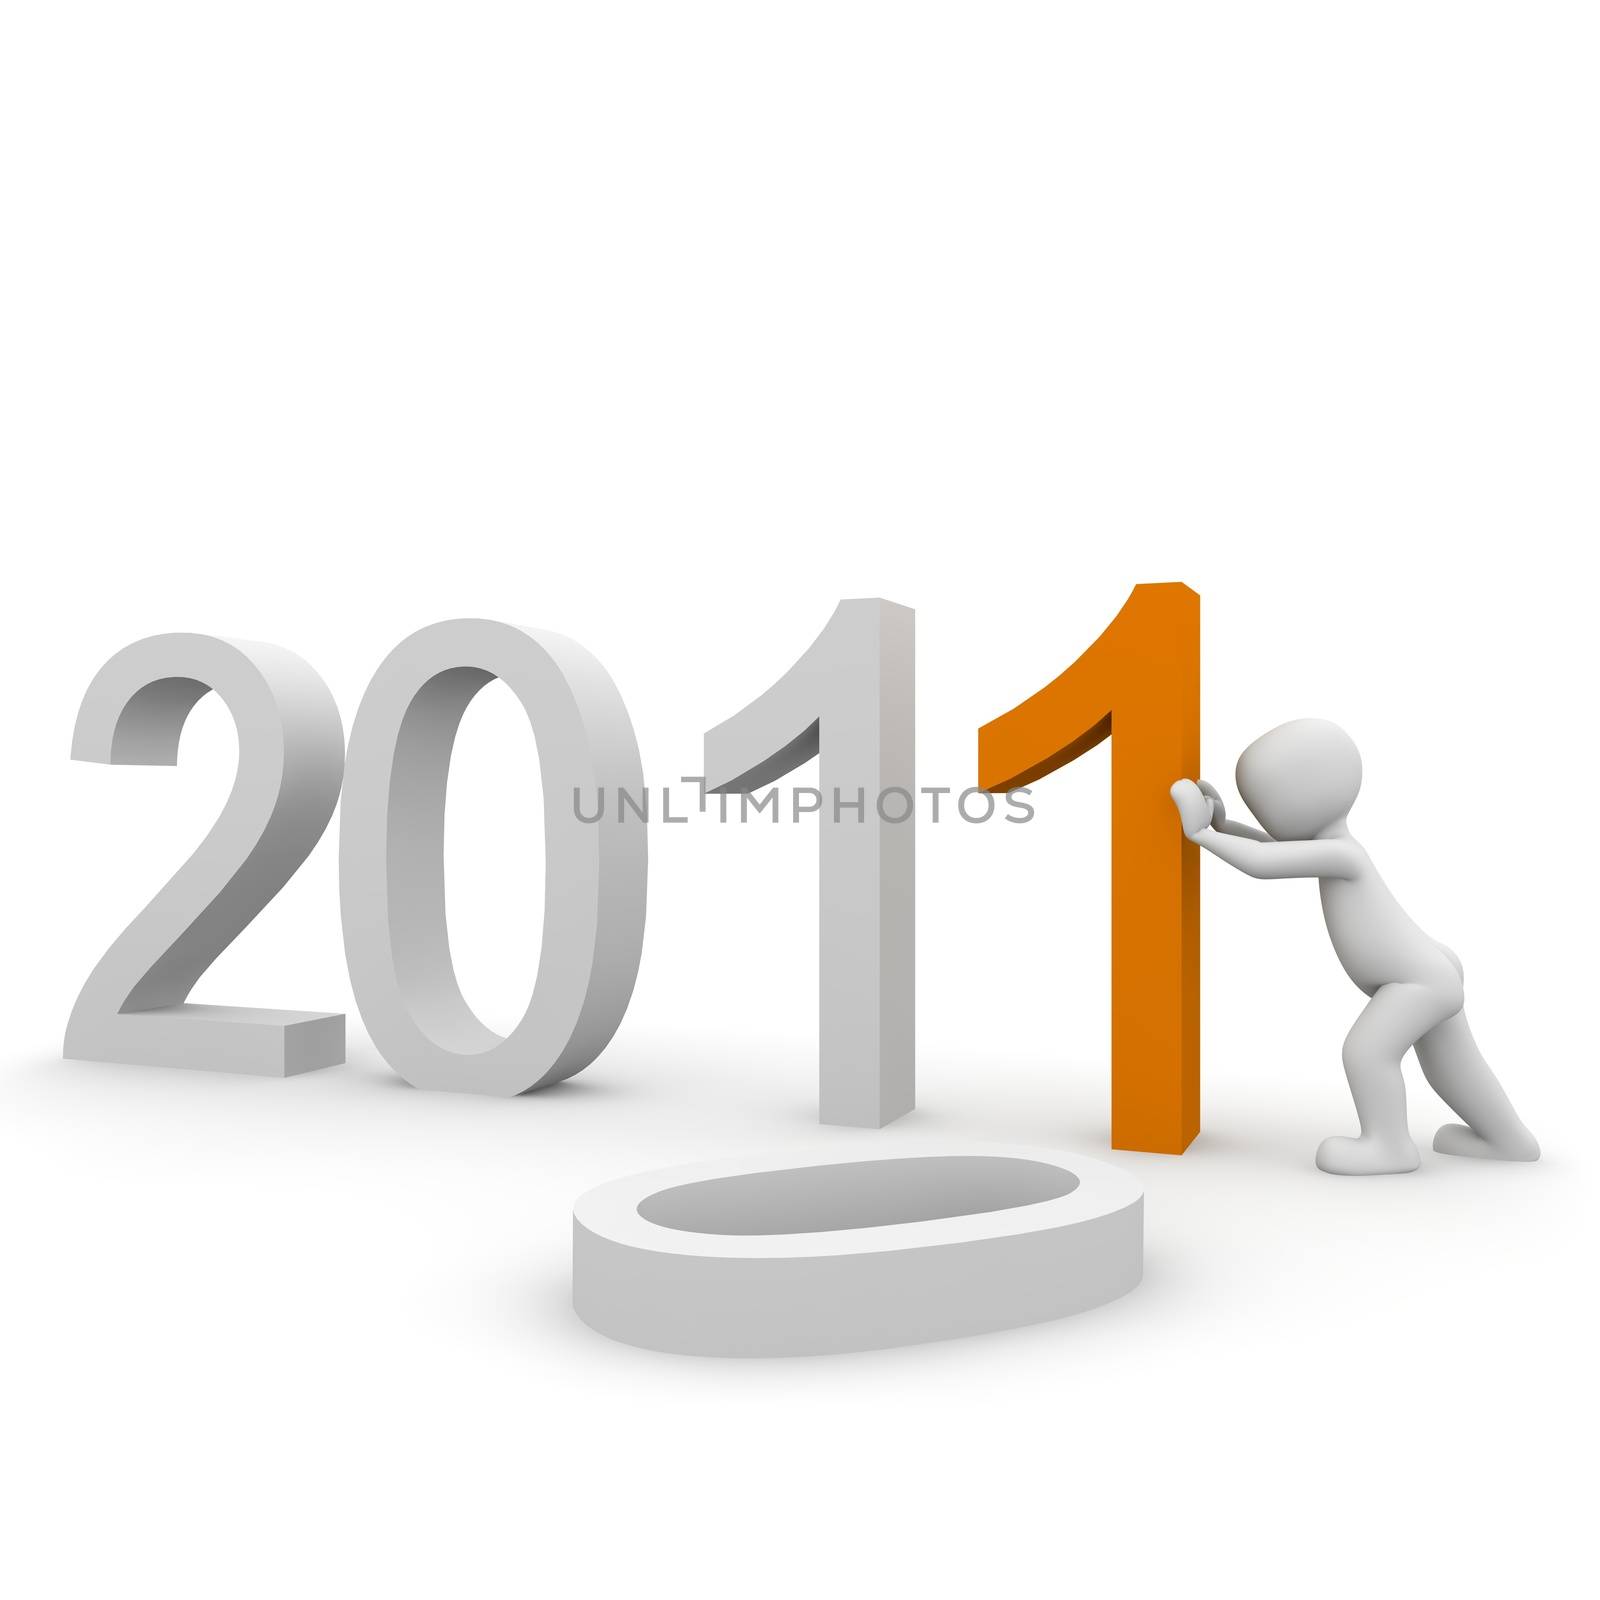 The year of 2010 is passing away and the new year 2011 is here.